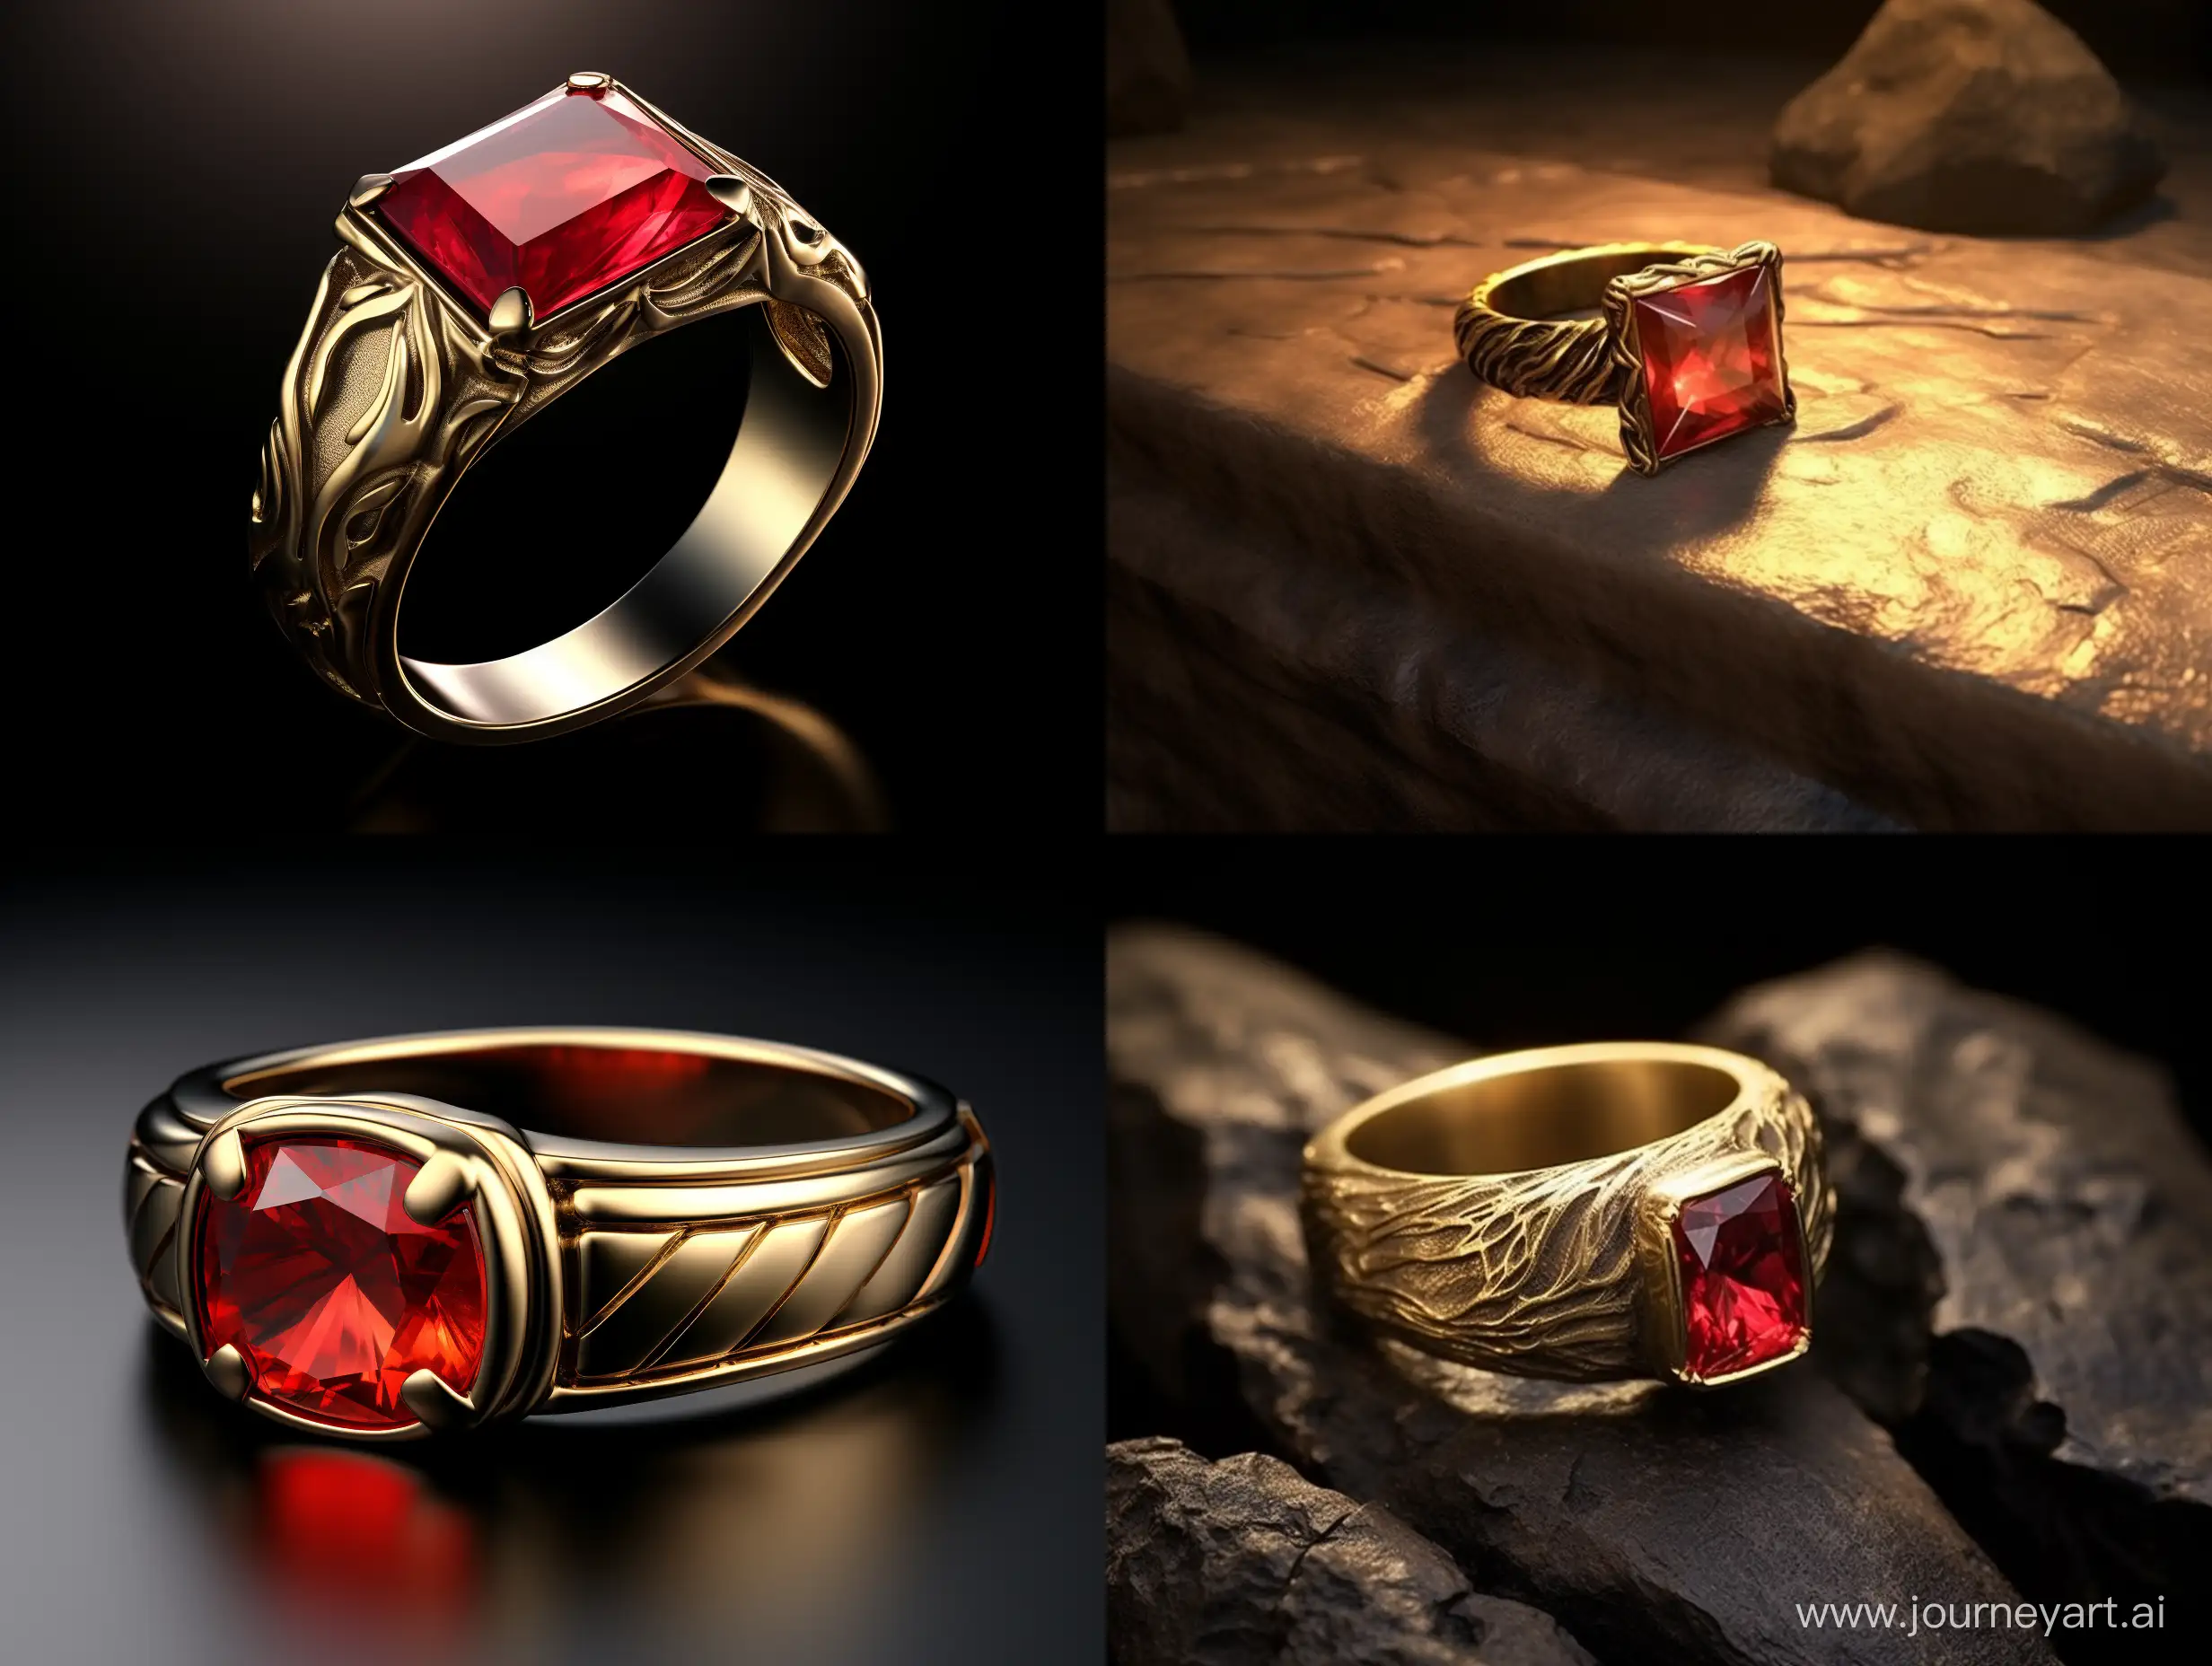 wide fantasy golden ring, with a red rectangle stone that is being held by veins and is misaligned on top of the ring